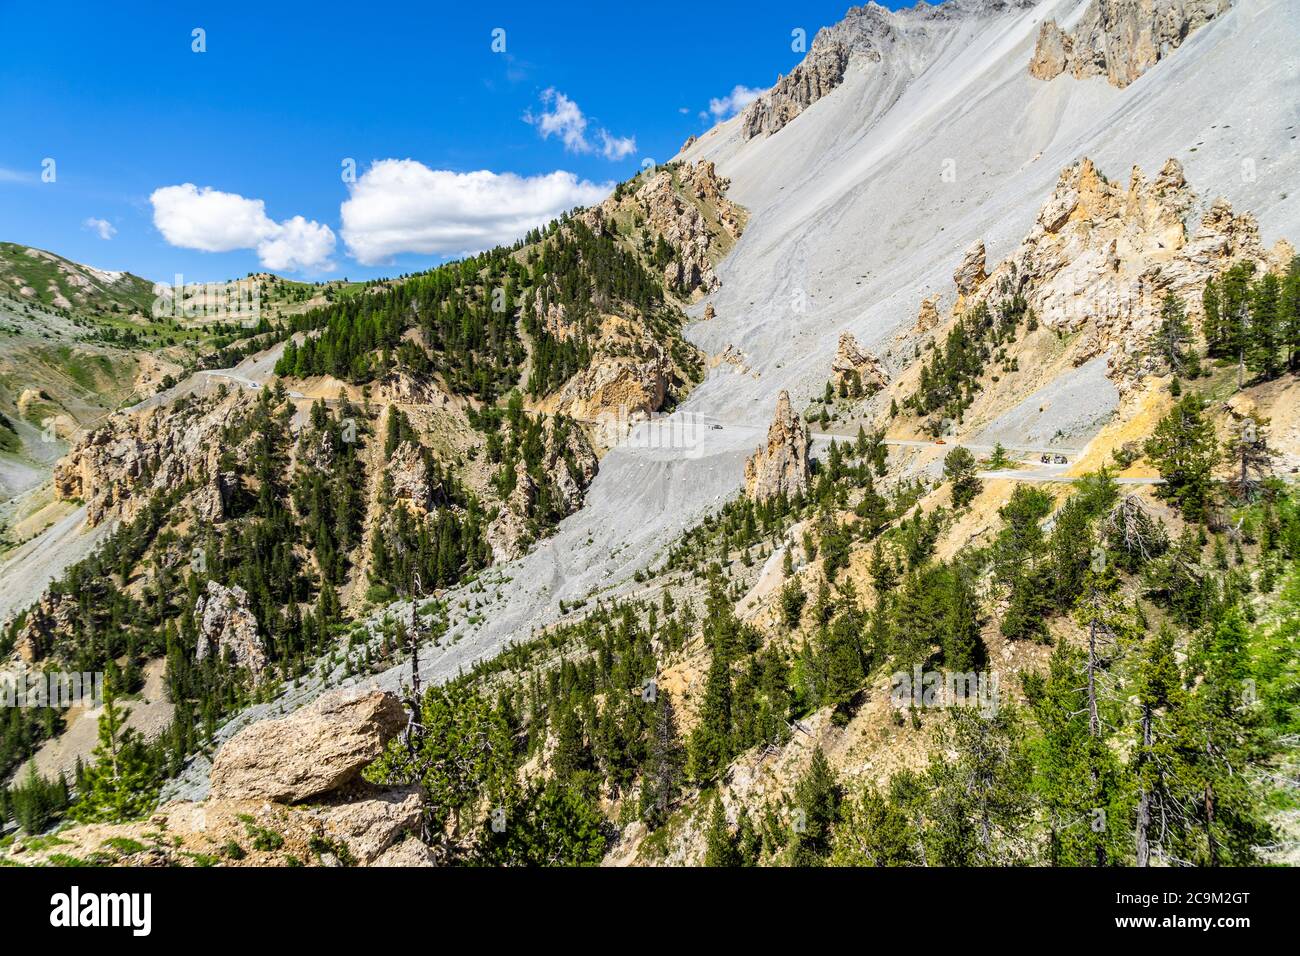 The scenic landscape of the Casse Deserte en route to the Col d'Izoard, one of the most iconic mountain pass of the Tour de France Stock Photo